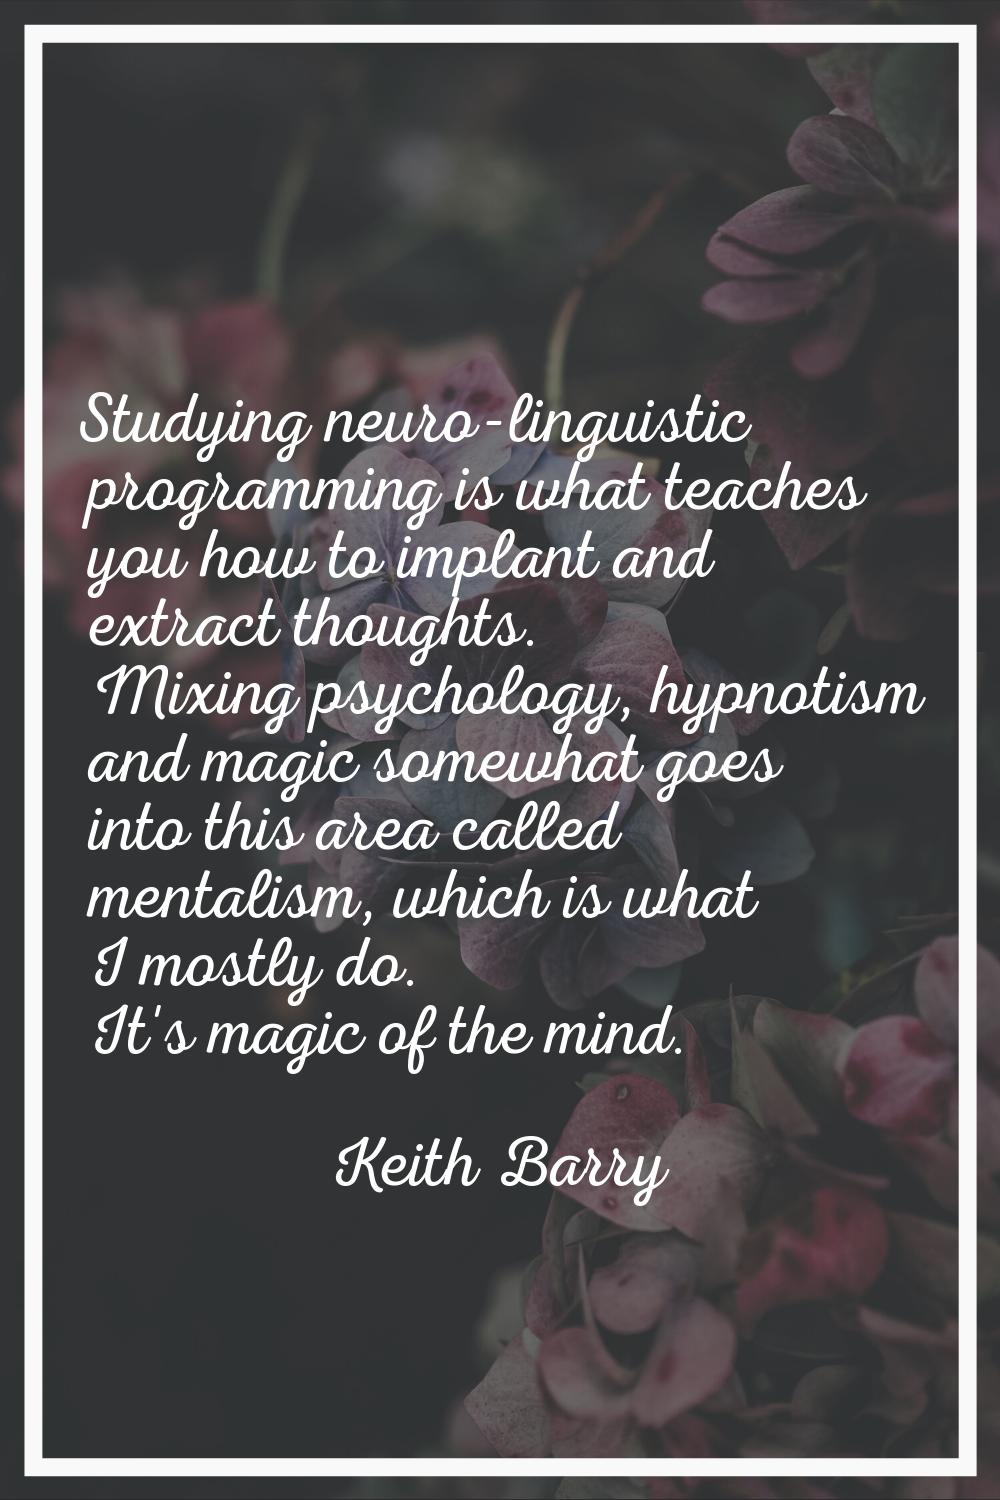 Studying neuro-linguistic programming is what teaches you how to implant and extract thoughts. Mixi